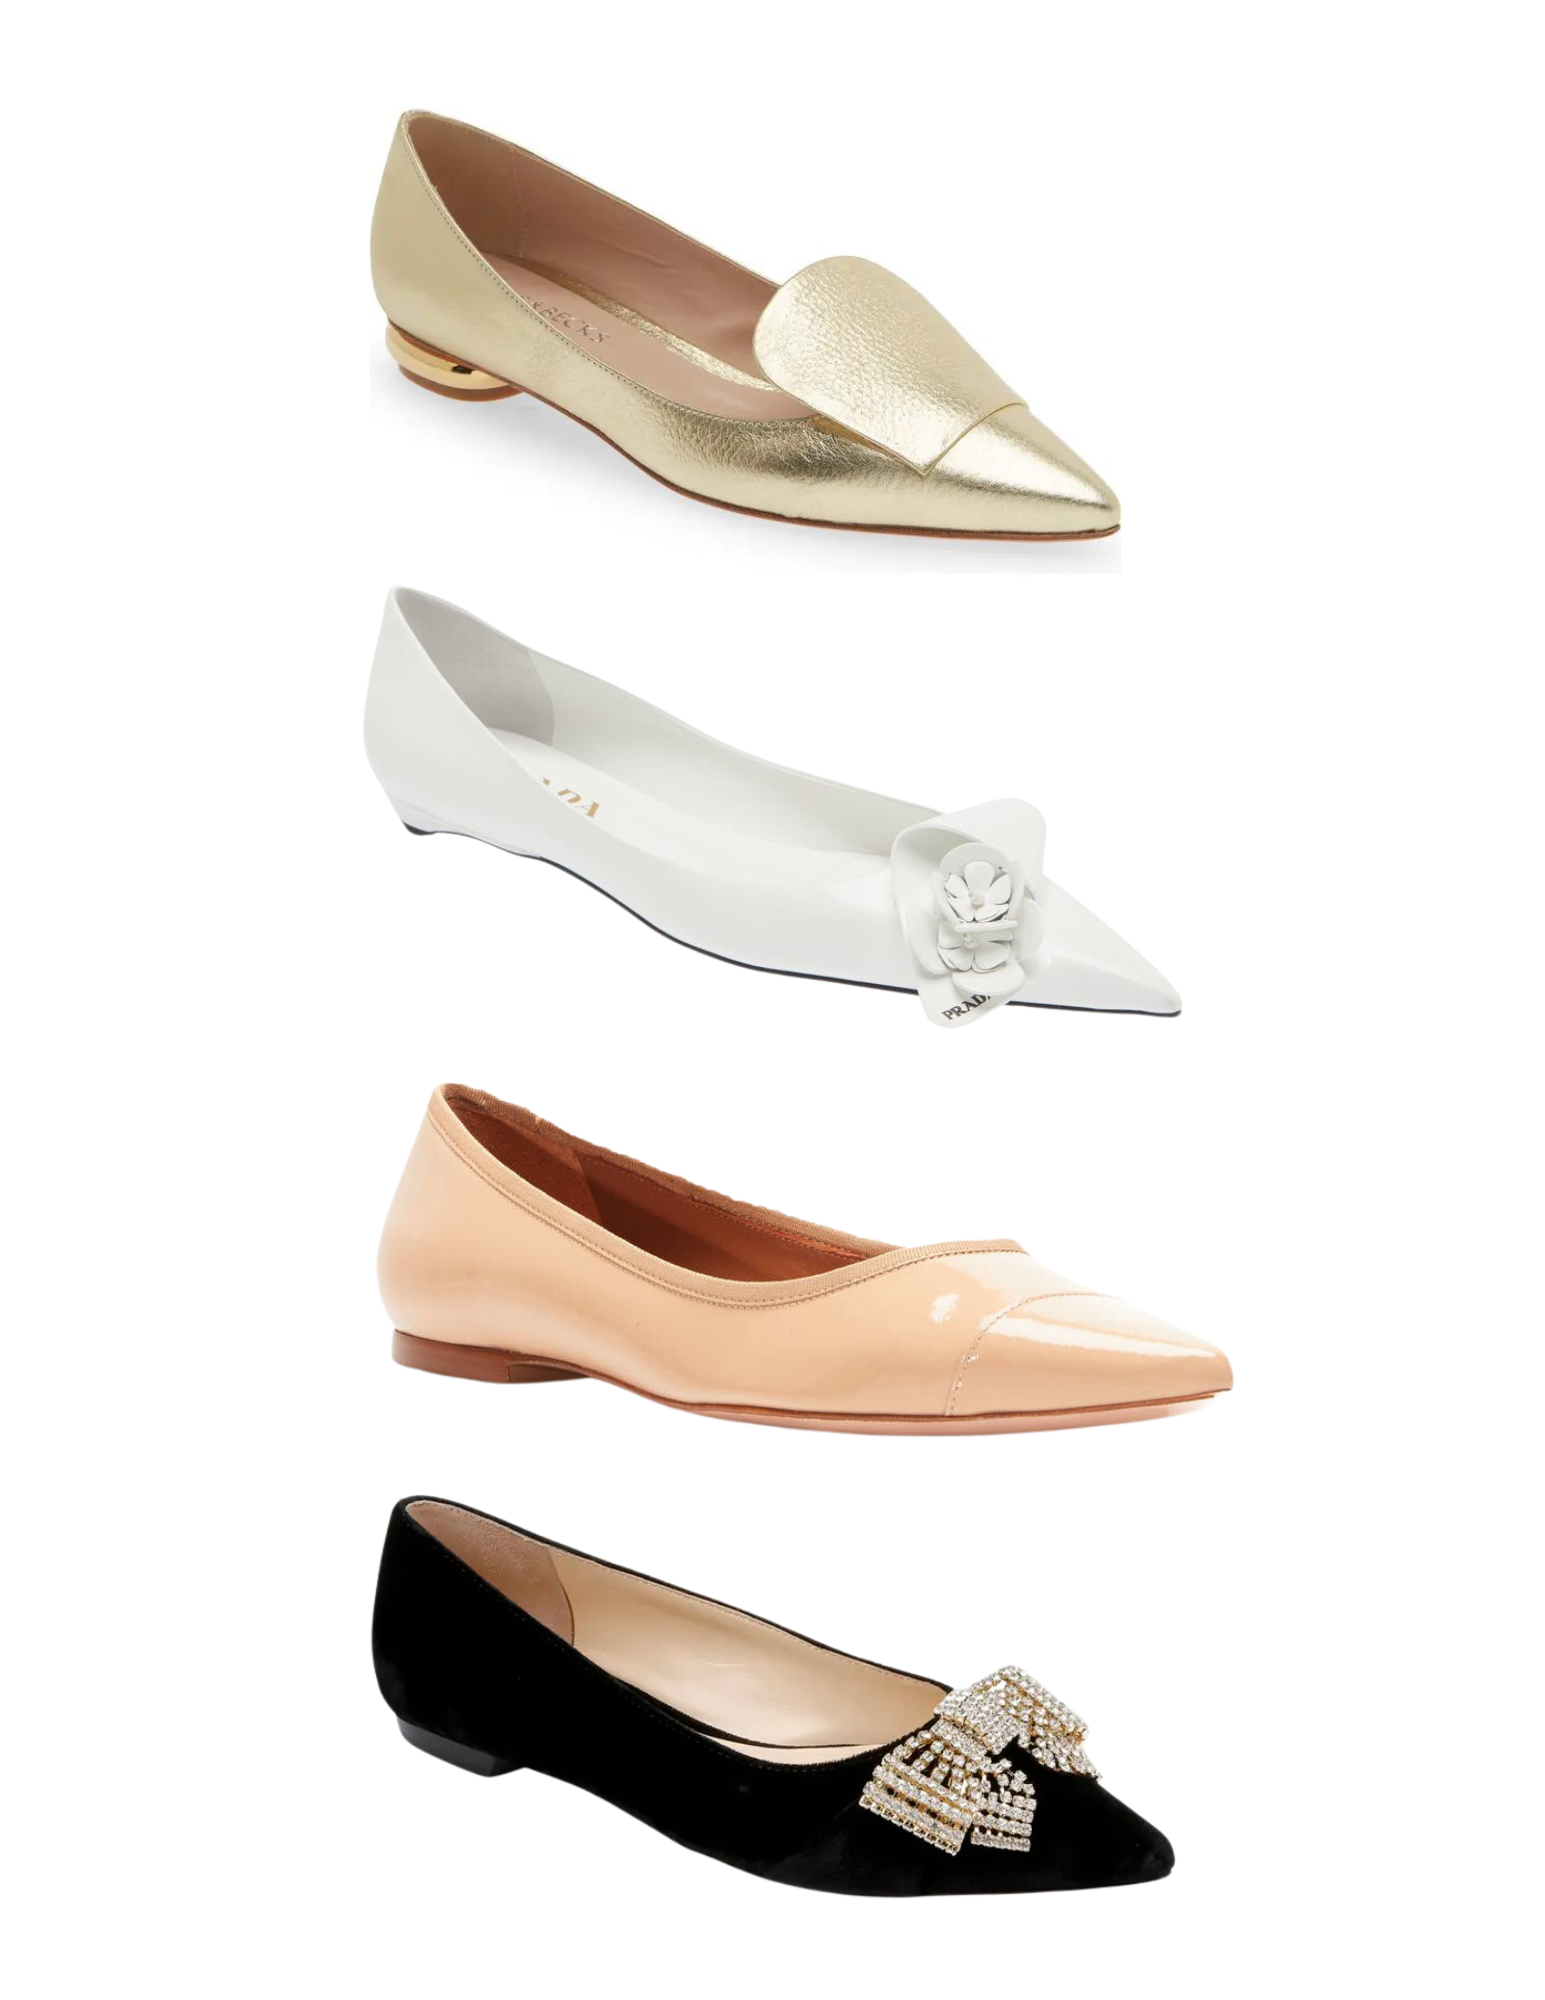 dressy flats you can wear with a cocktail dress, best formal flats